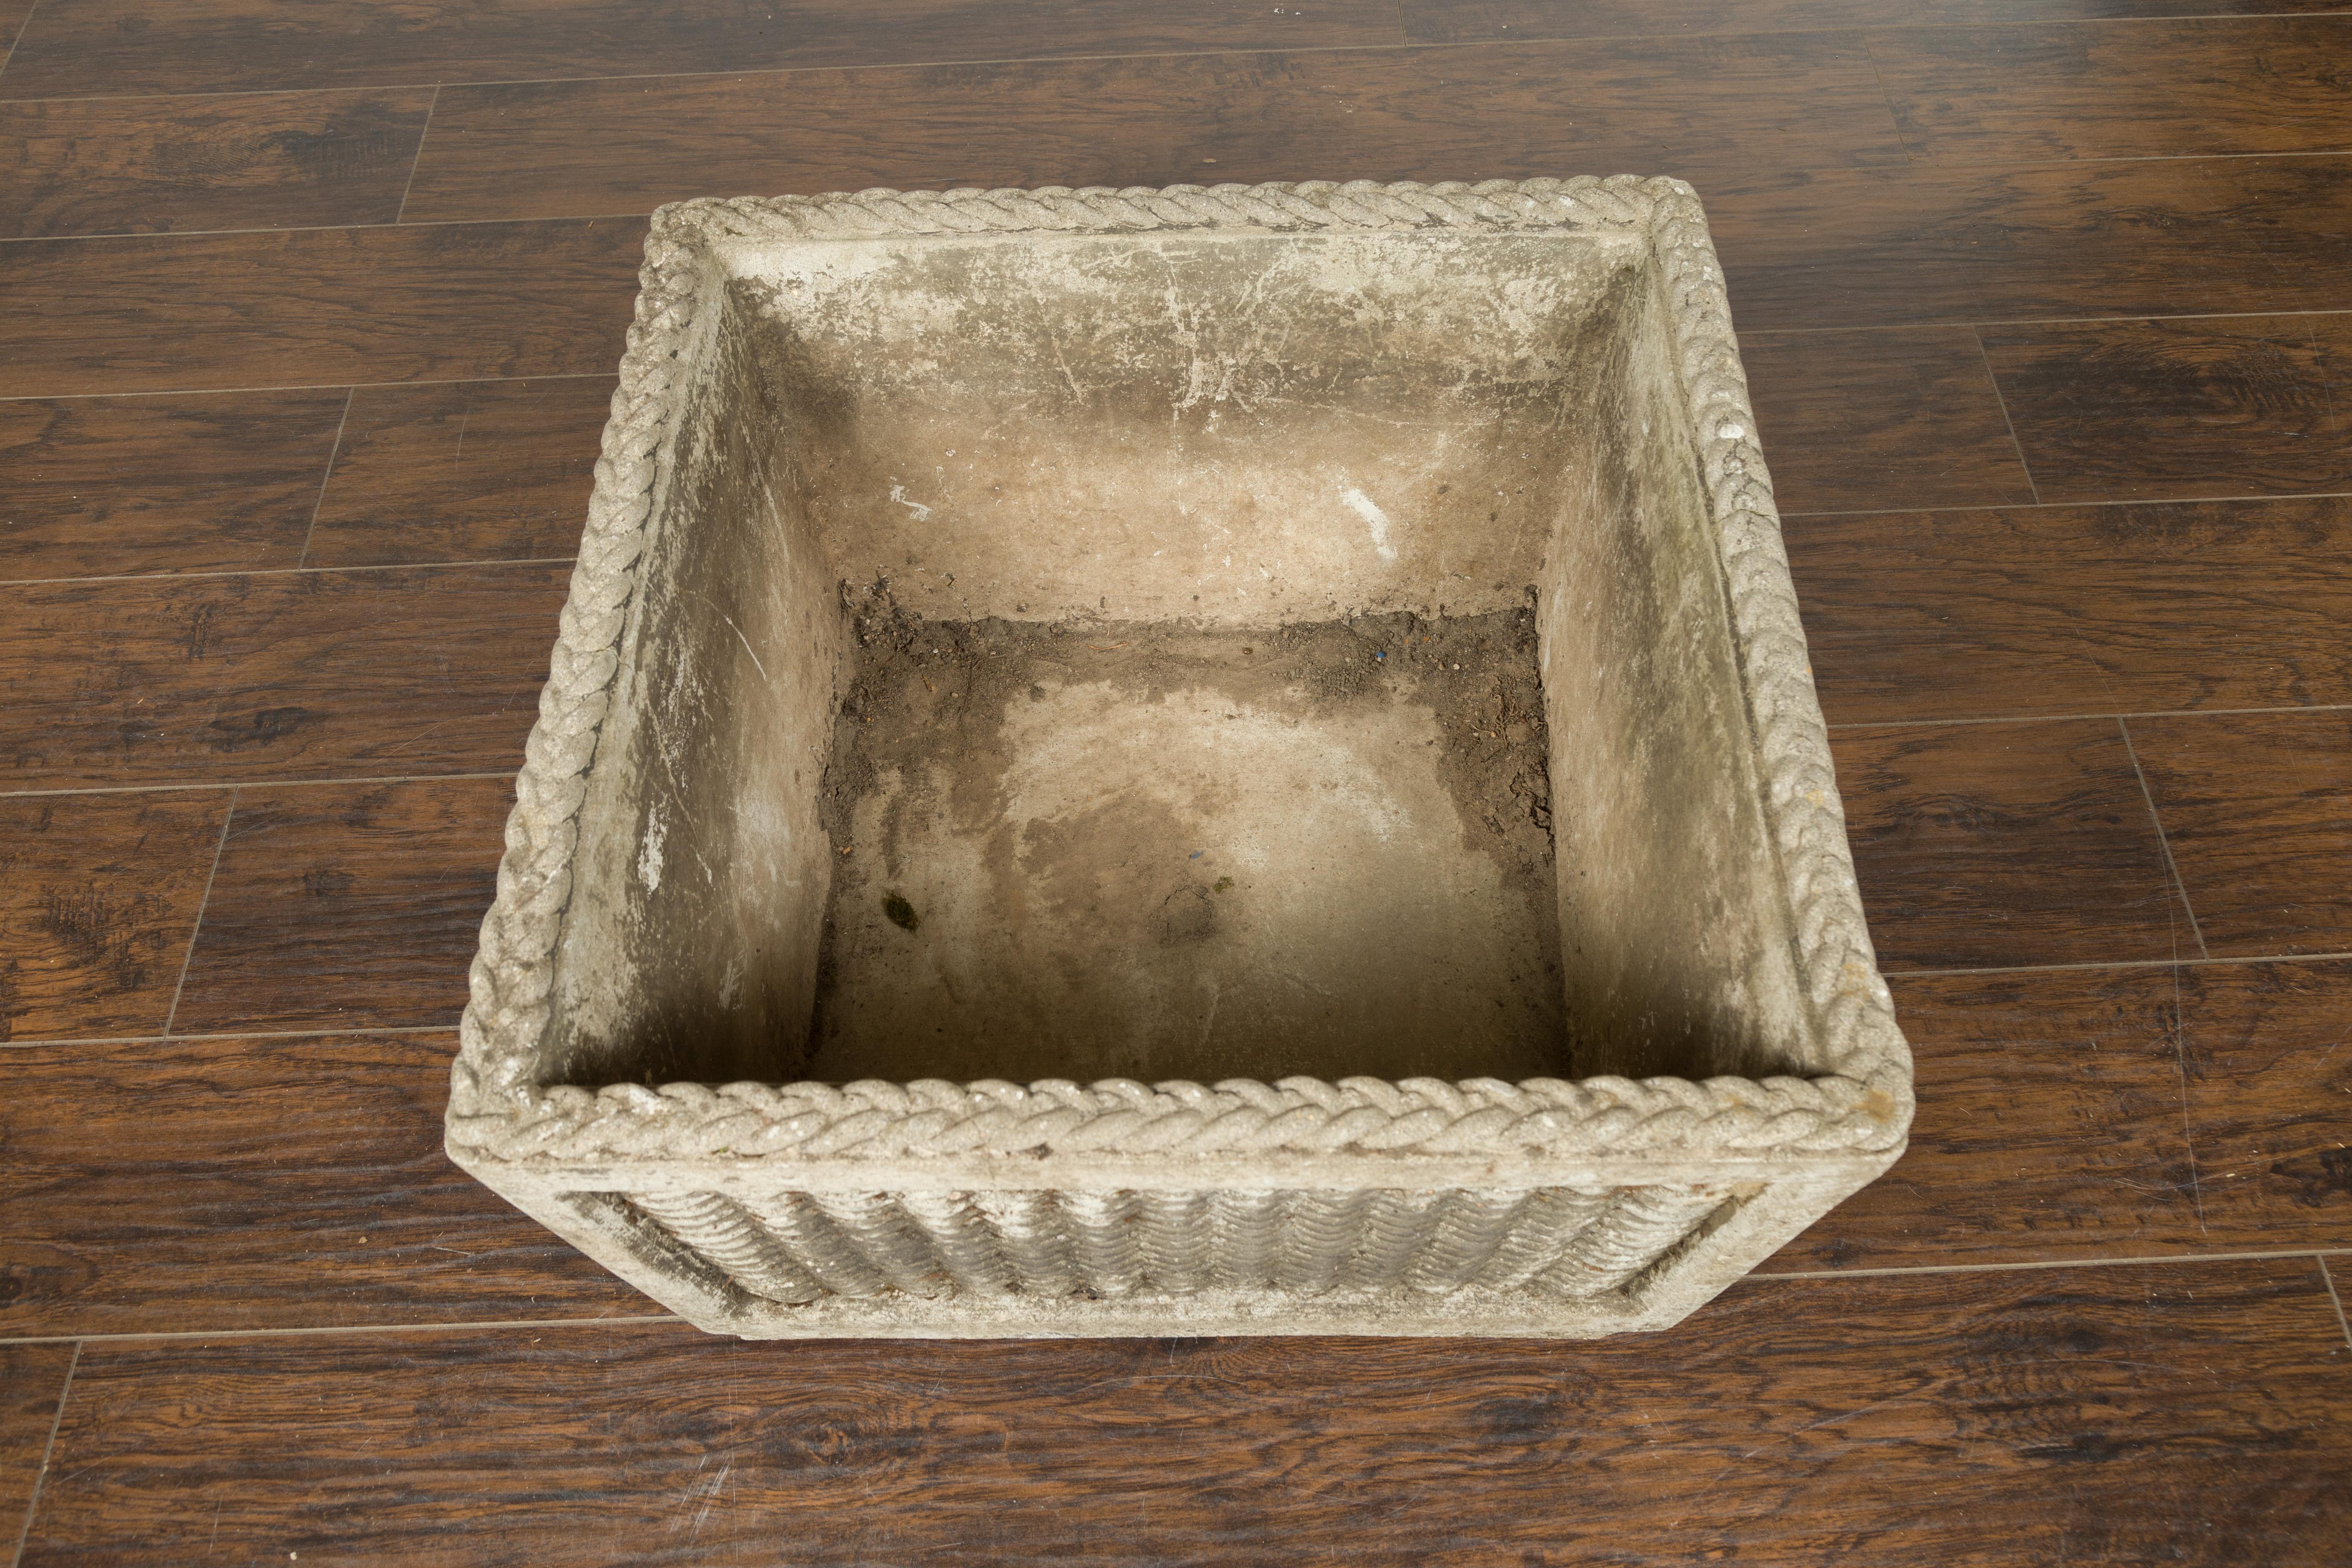 Vintage English Midcentury Stone Planter with Textured Finish and Aged Patina For Sale 8